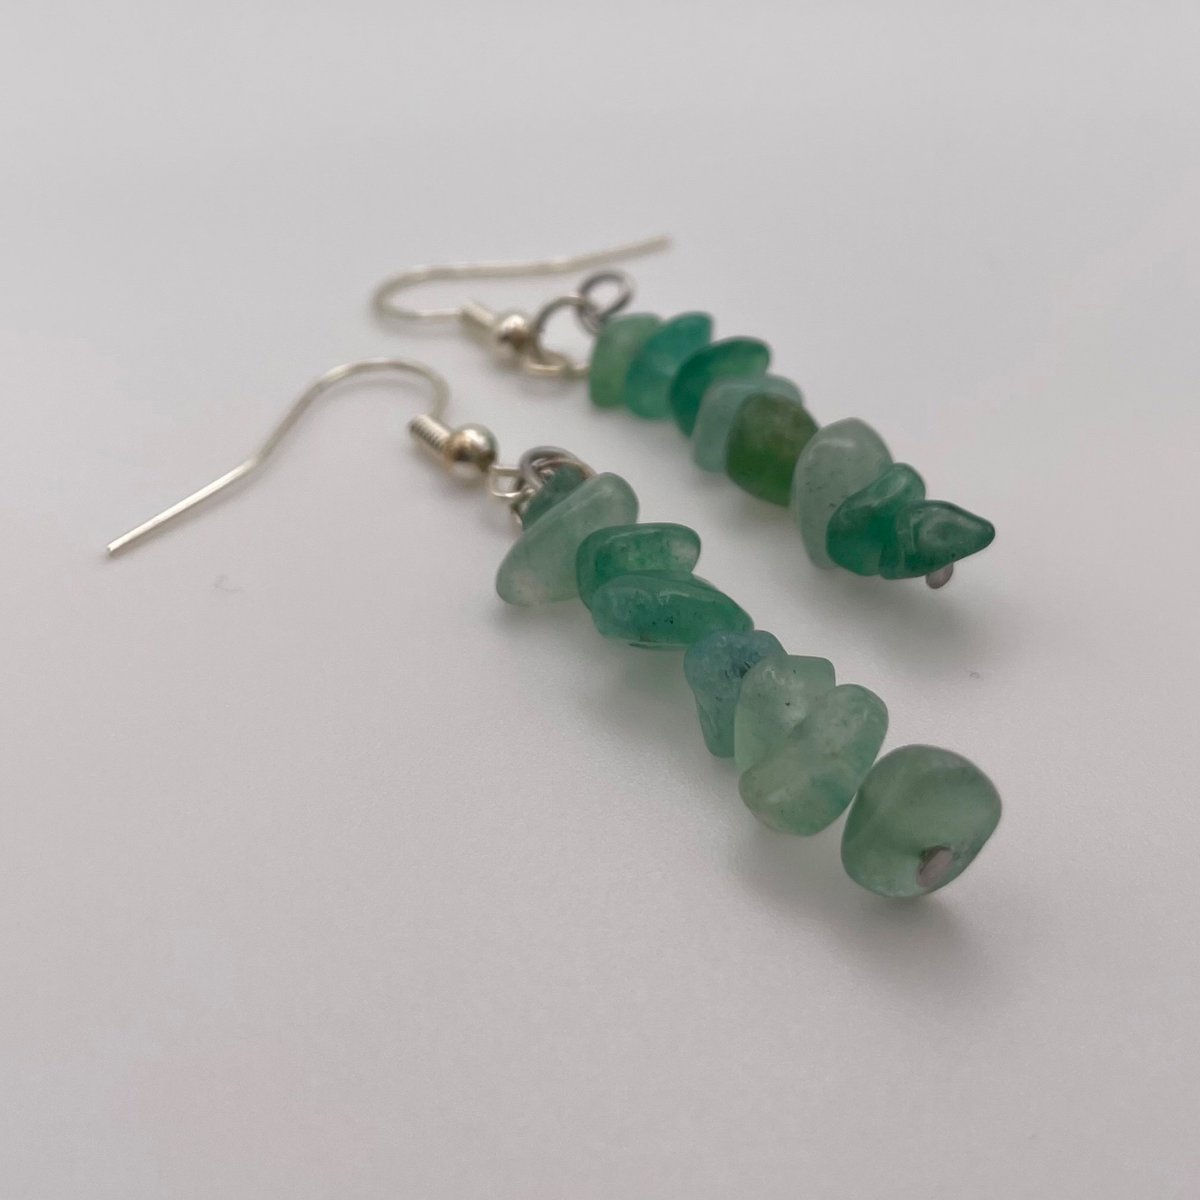 Green Aventurine - for luck and prosperity 💚🍀
Love wearing these to bring a little luck to my day💚
what’s your go-to crystal?
#crystaljewellery #crystalearrings #smallukbusiness #shopsmall #greenaventurine